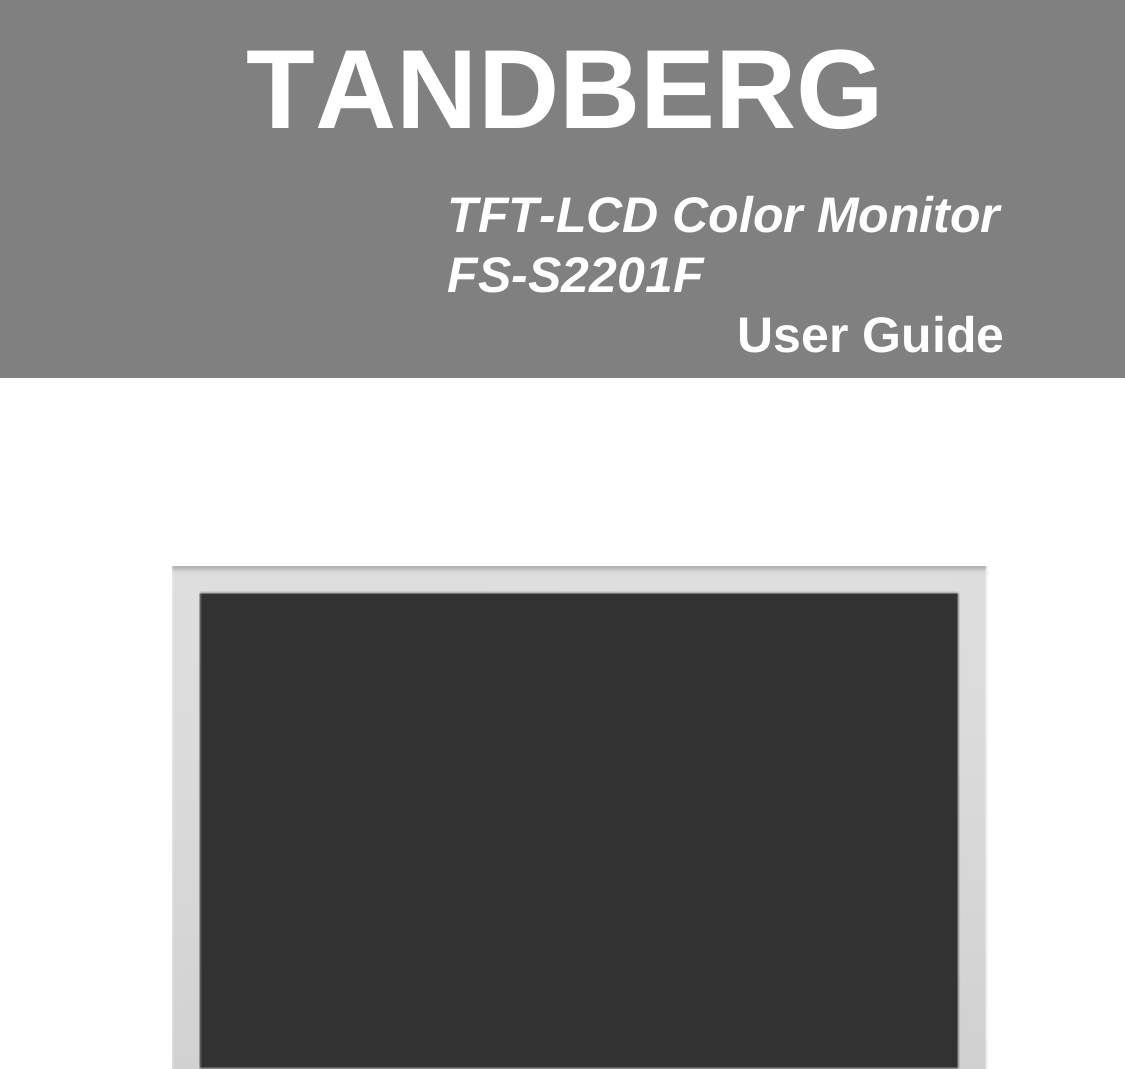 General Specification TFT-LCD Color MonitorFS-S2201F User GuideTANDBERG